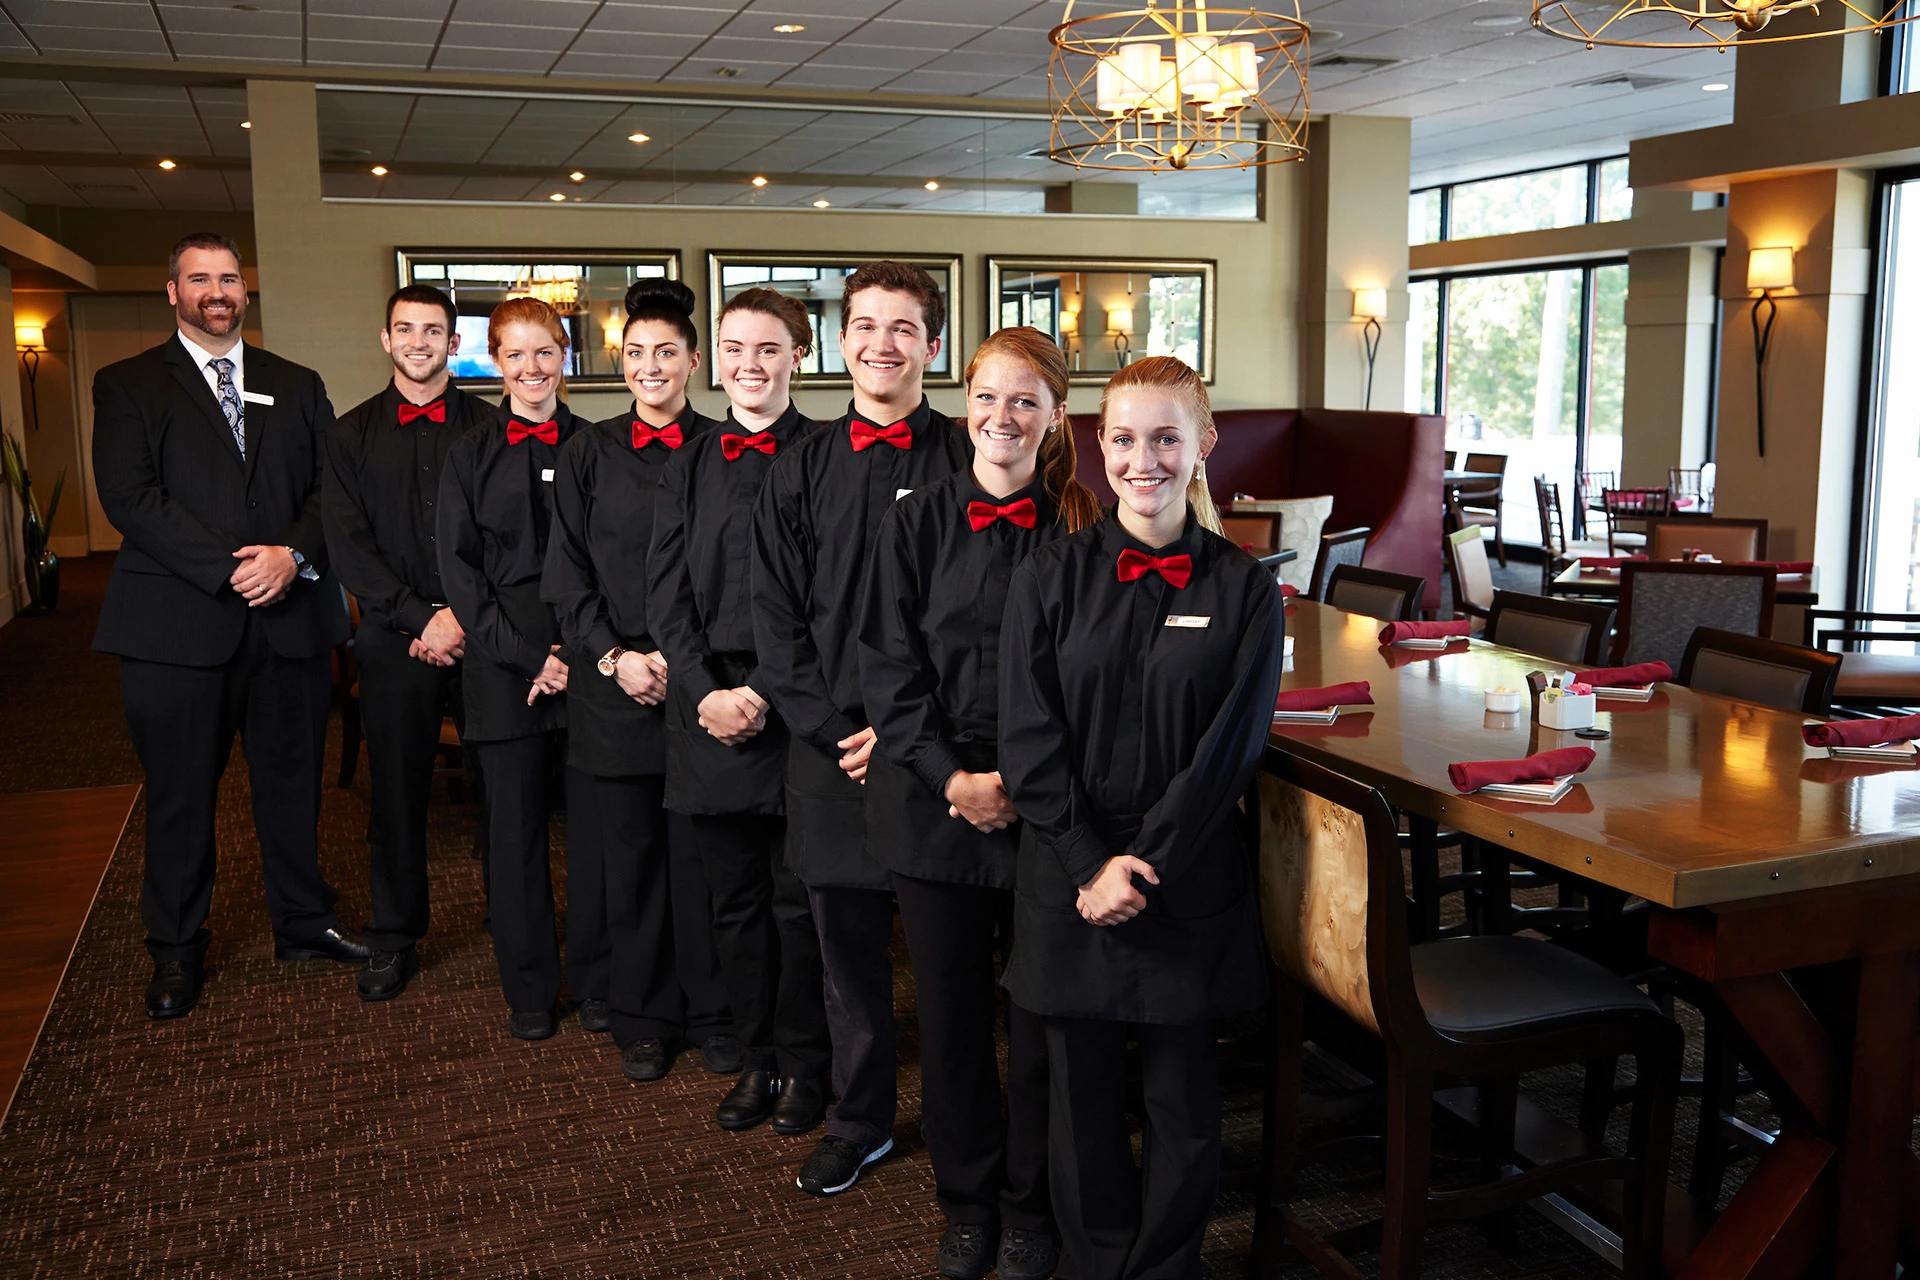 Ipswich Country Club - Employees